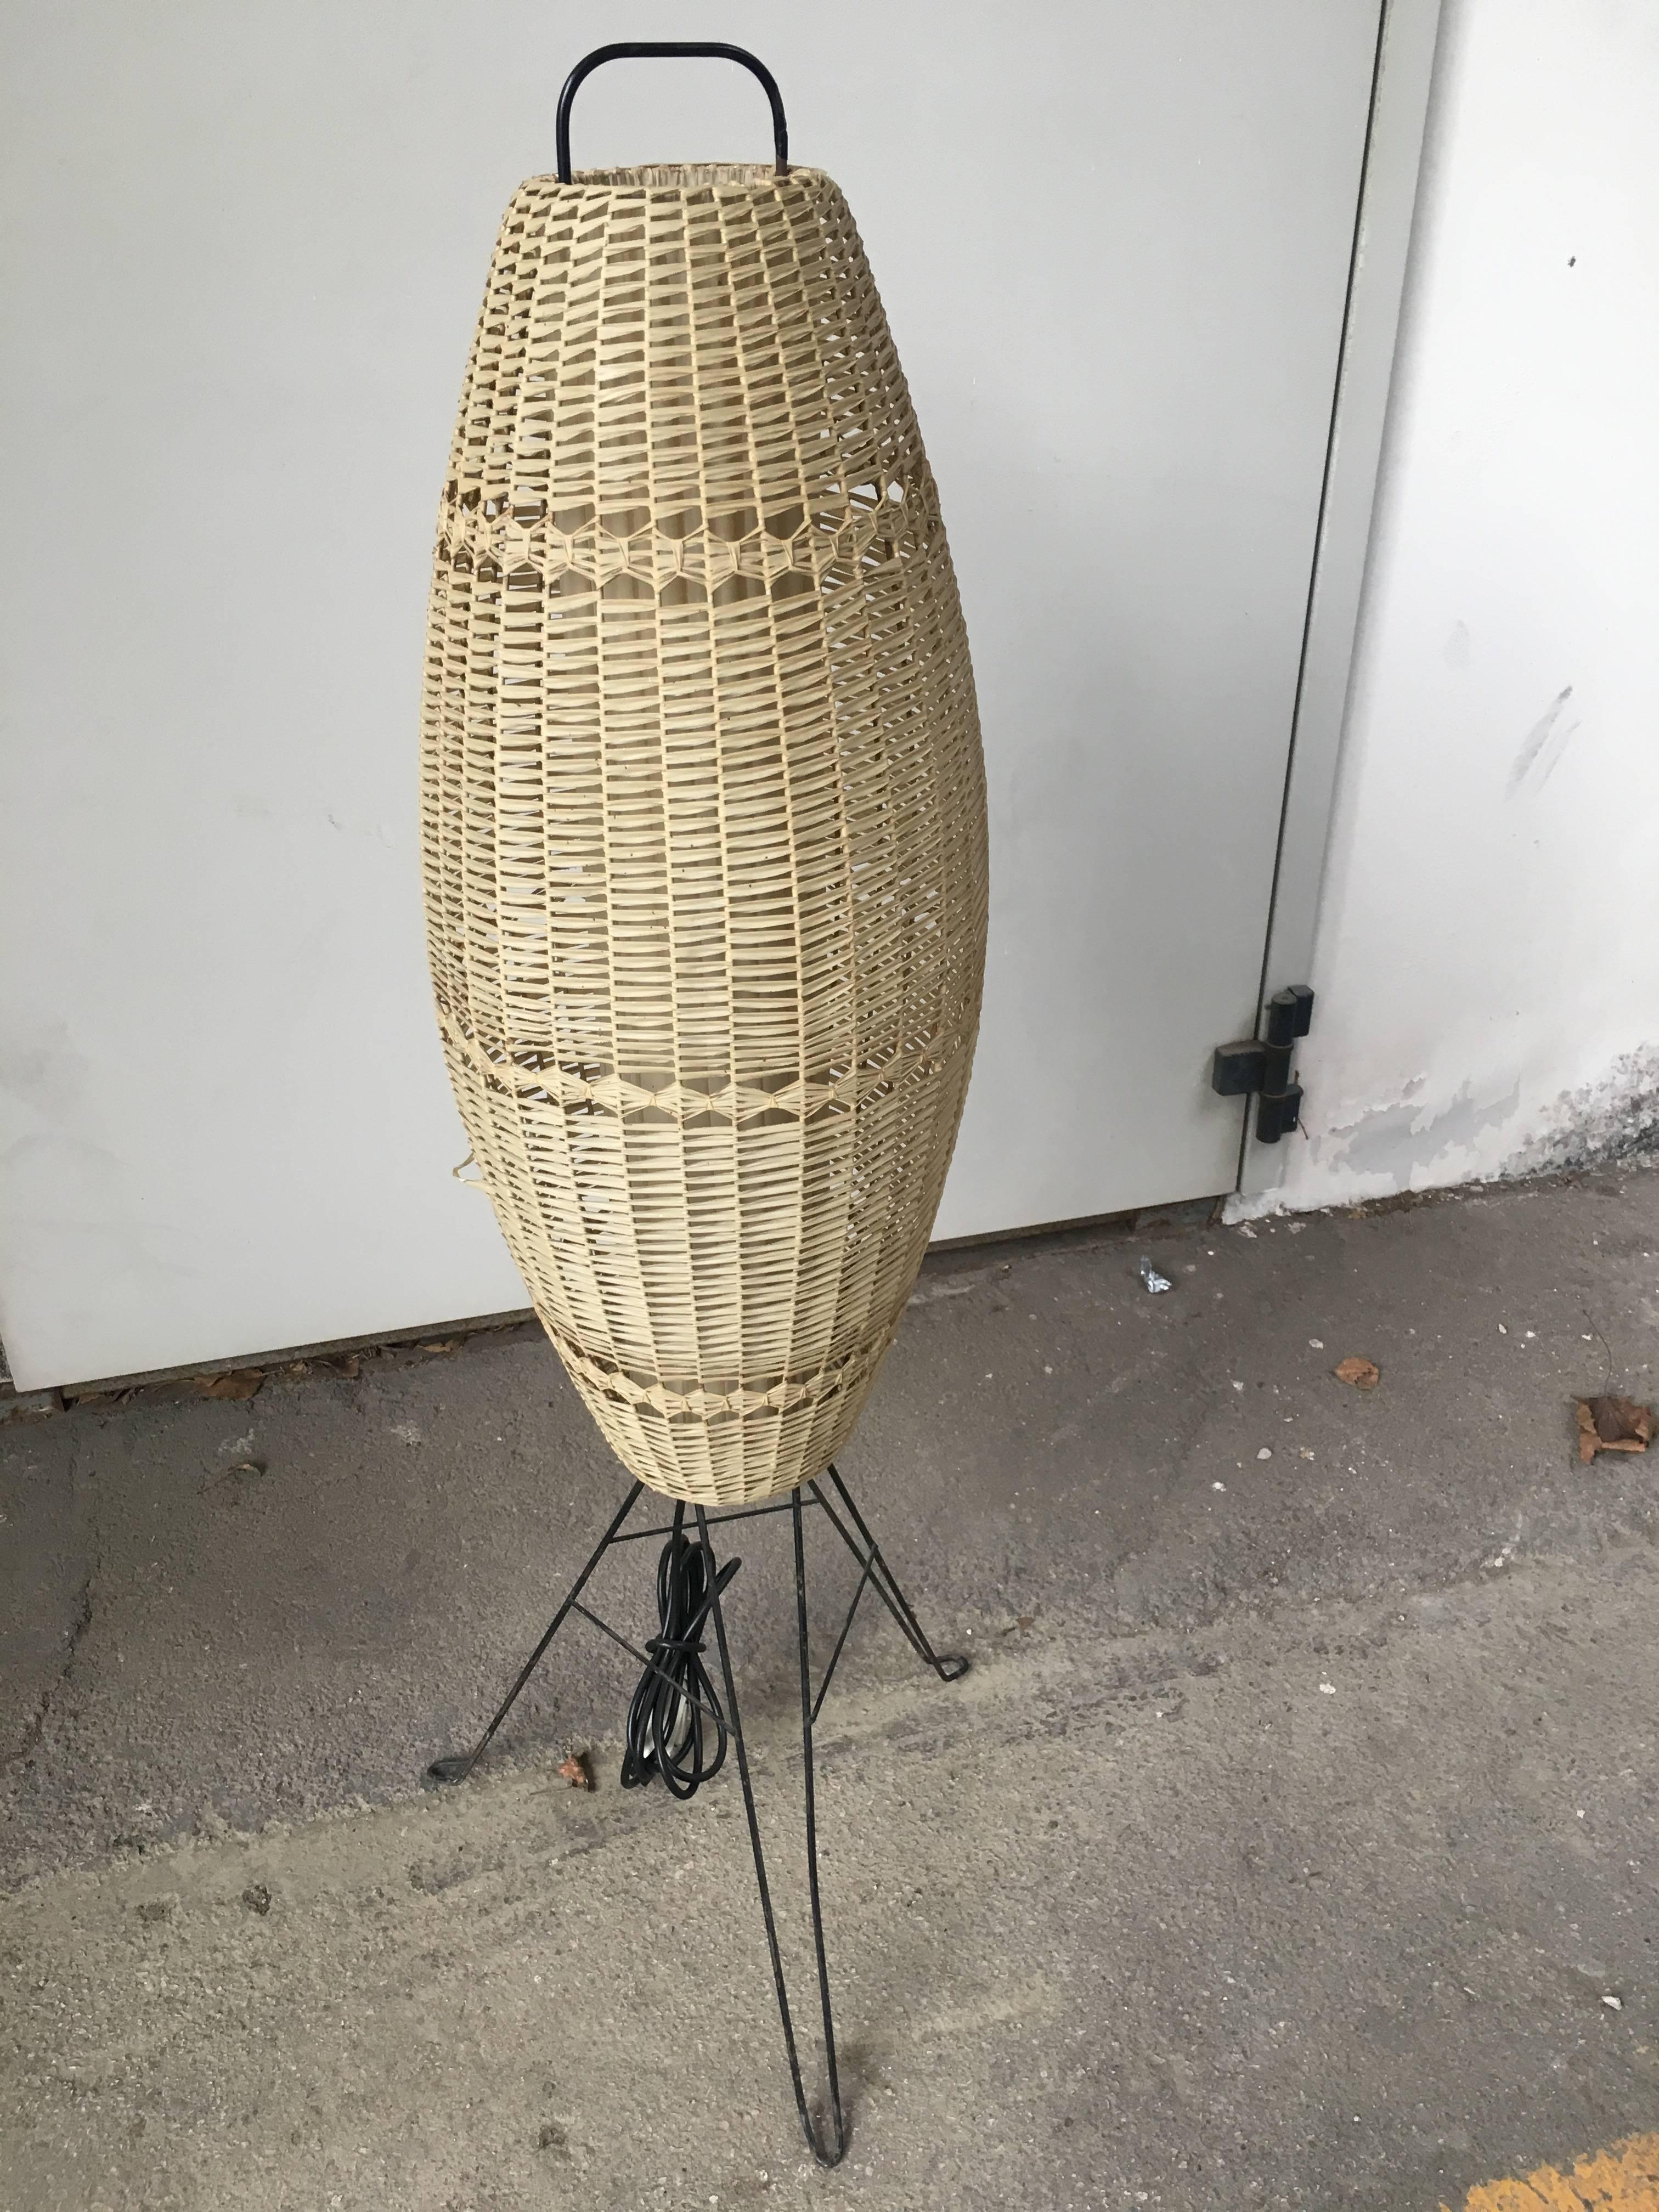 Italian floor lamp with braided tape from 1950s
Measures: Base diameter cm.40
Lampshade diameter cm.30
Height cm.118
The lampshade has a little detachment of the fabric as shown in the picture.
 